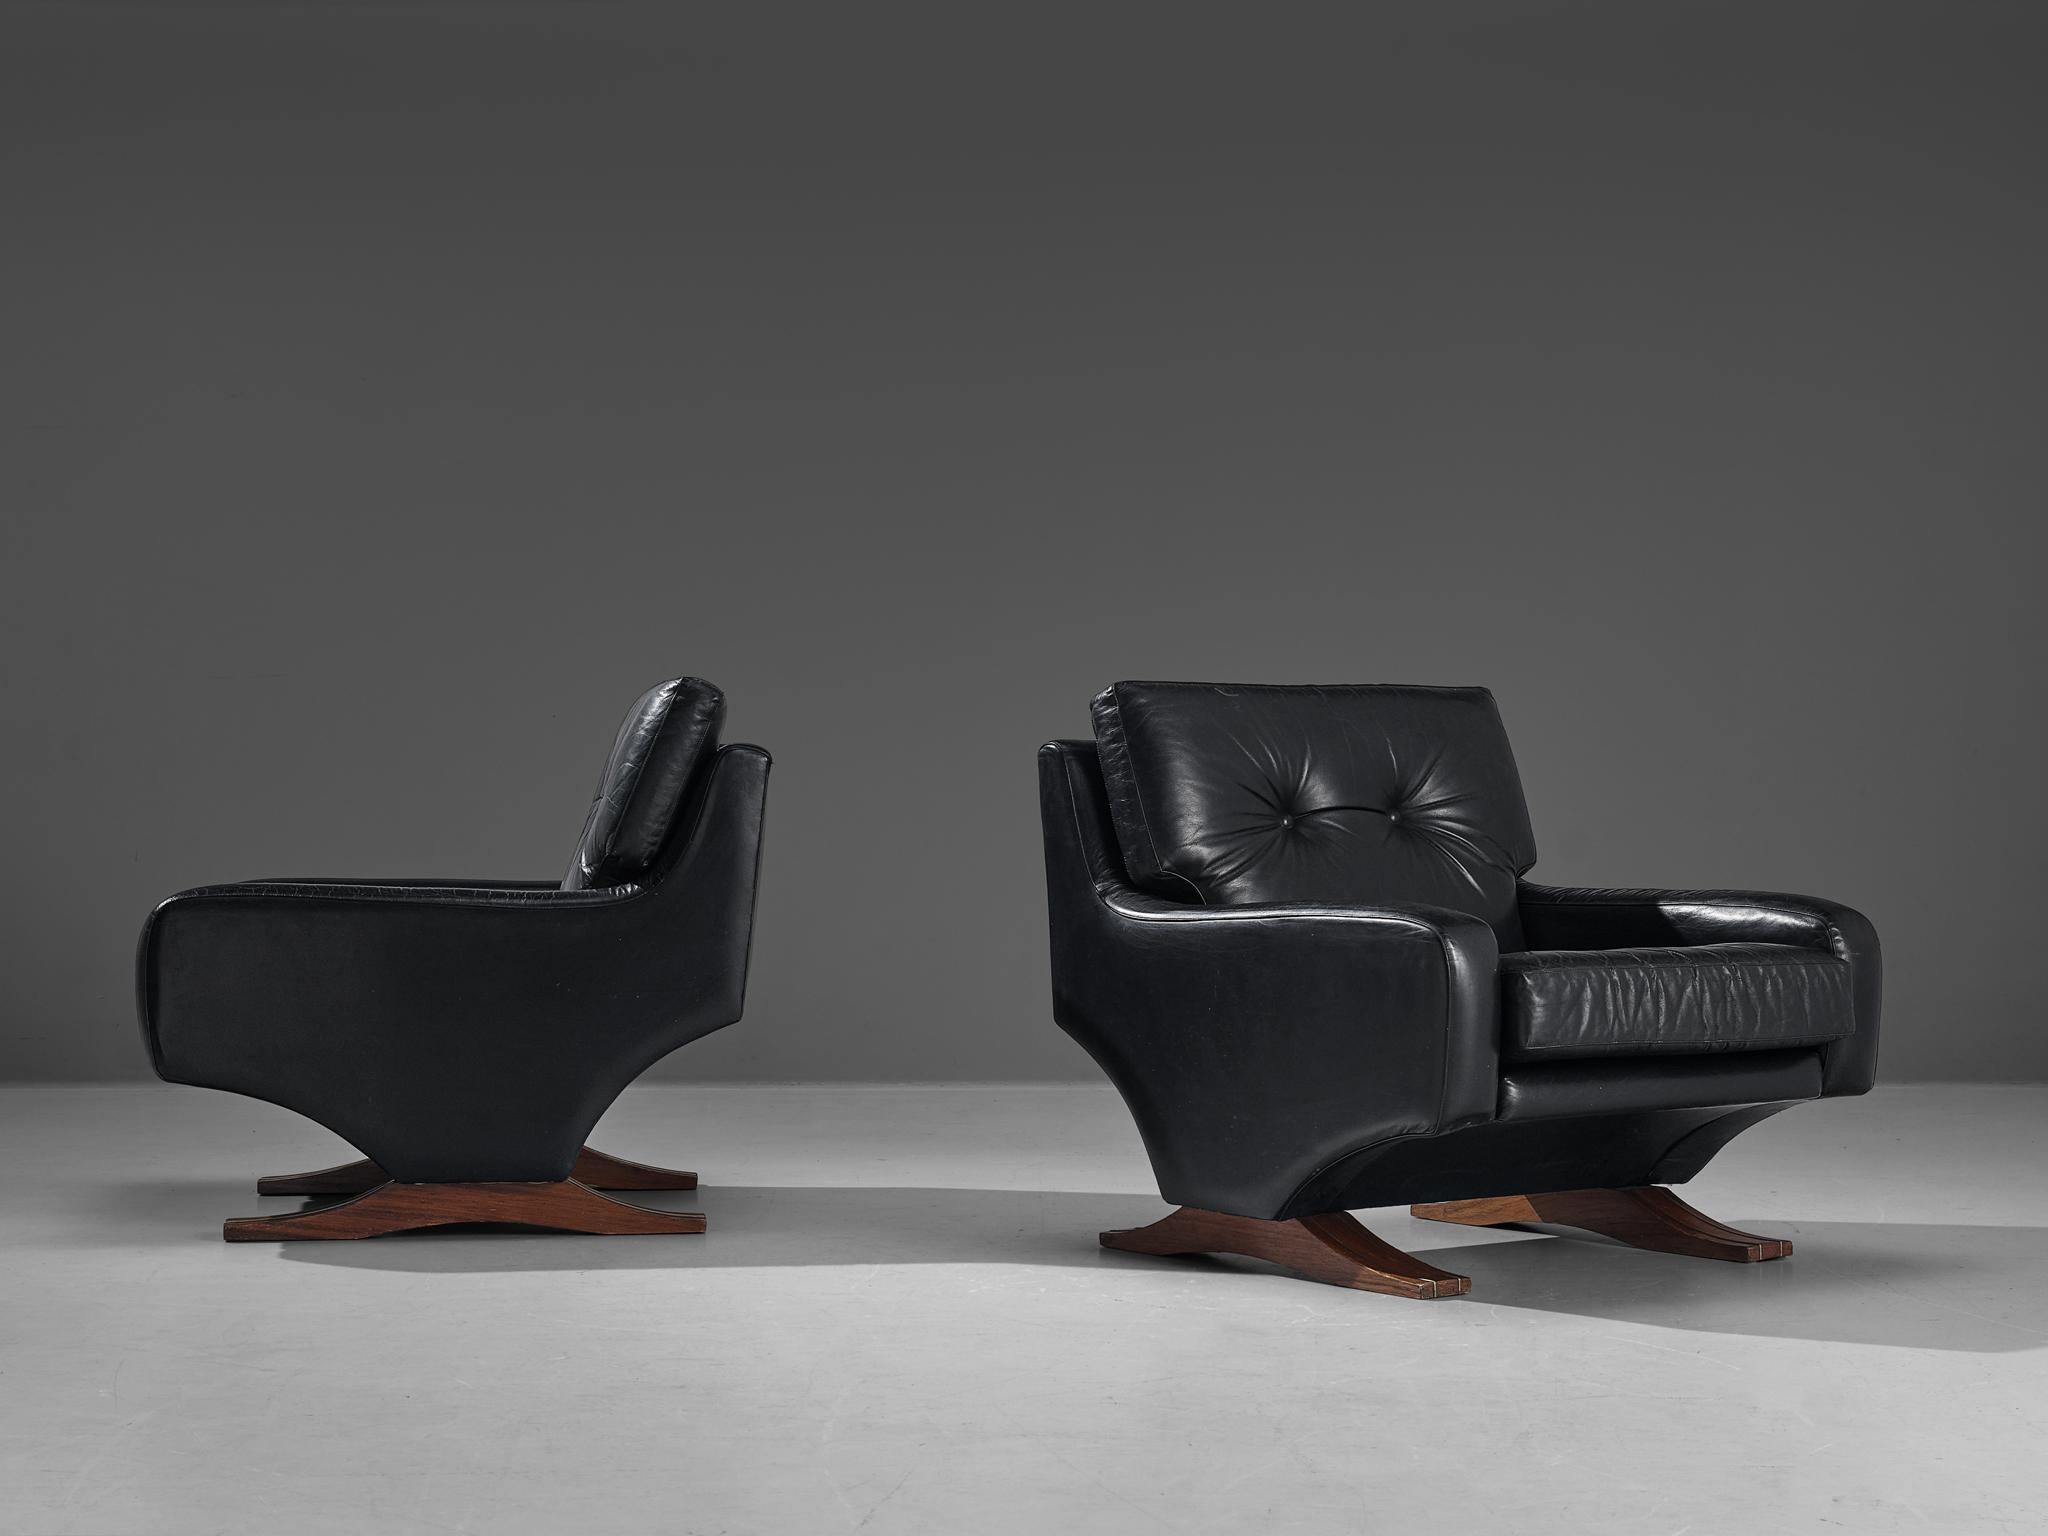 Franz Sartori for Flexform, pair of lounge chairs, leather, stained wood, Italy, circa 1965.

Sturdy pair of lounge chairs in black leather by the Italian sculptor Franz Sartori. These chairs feature a modern design due to the straight lines. The